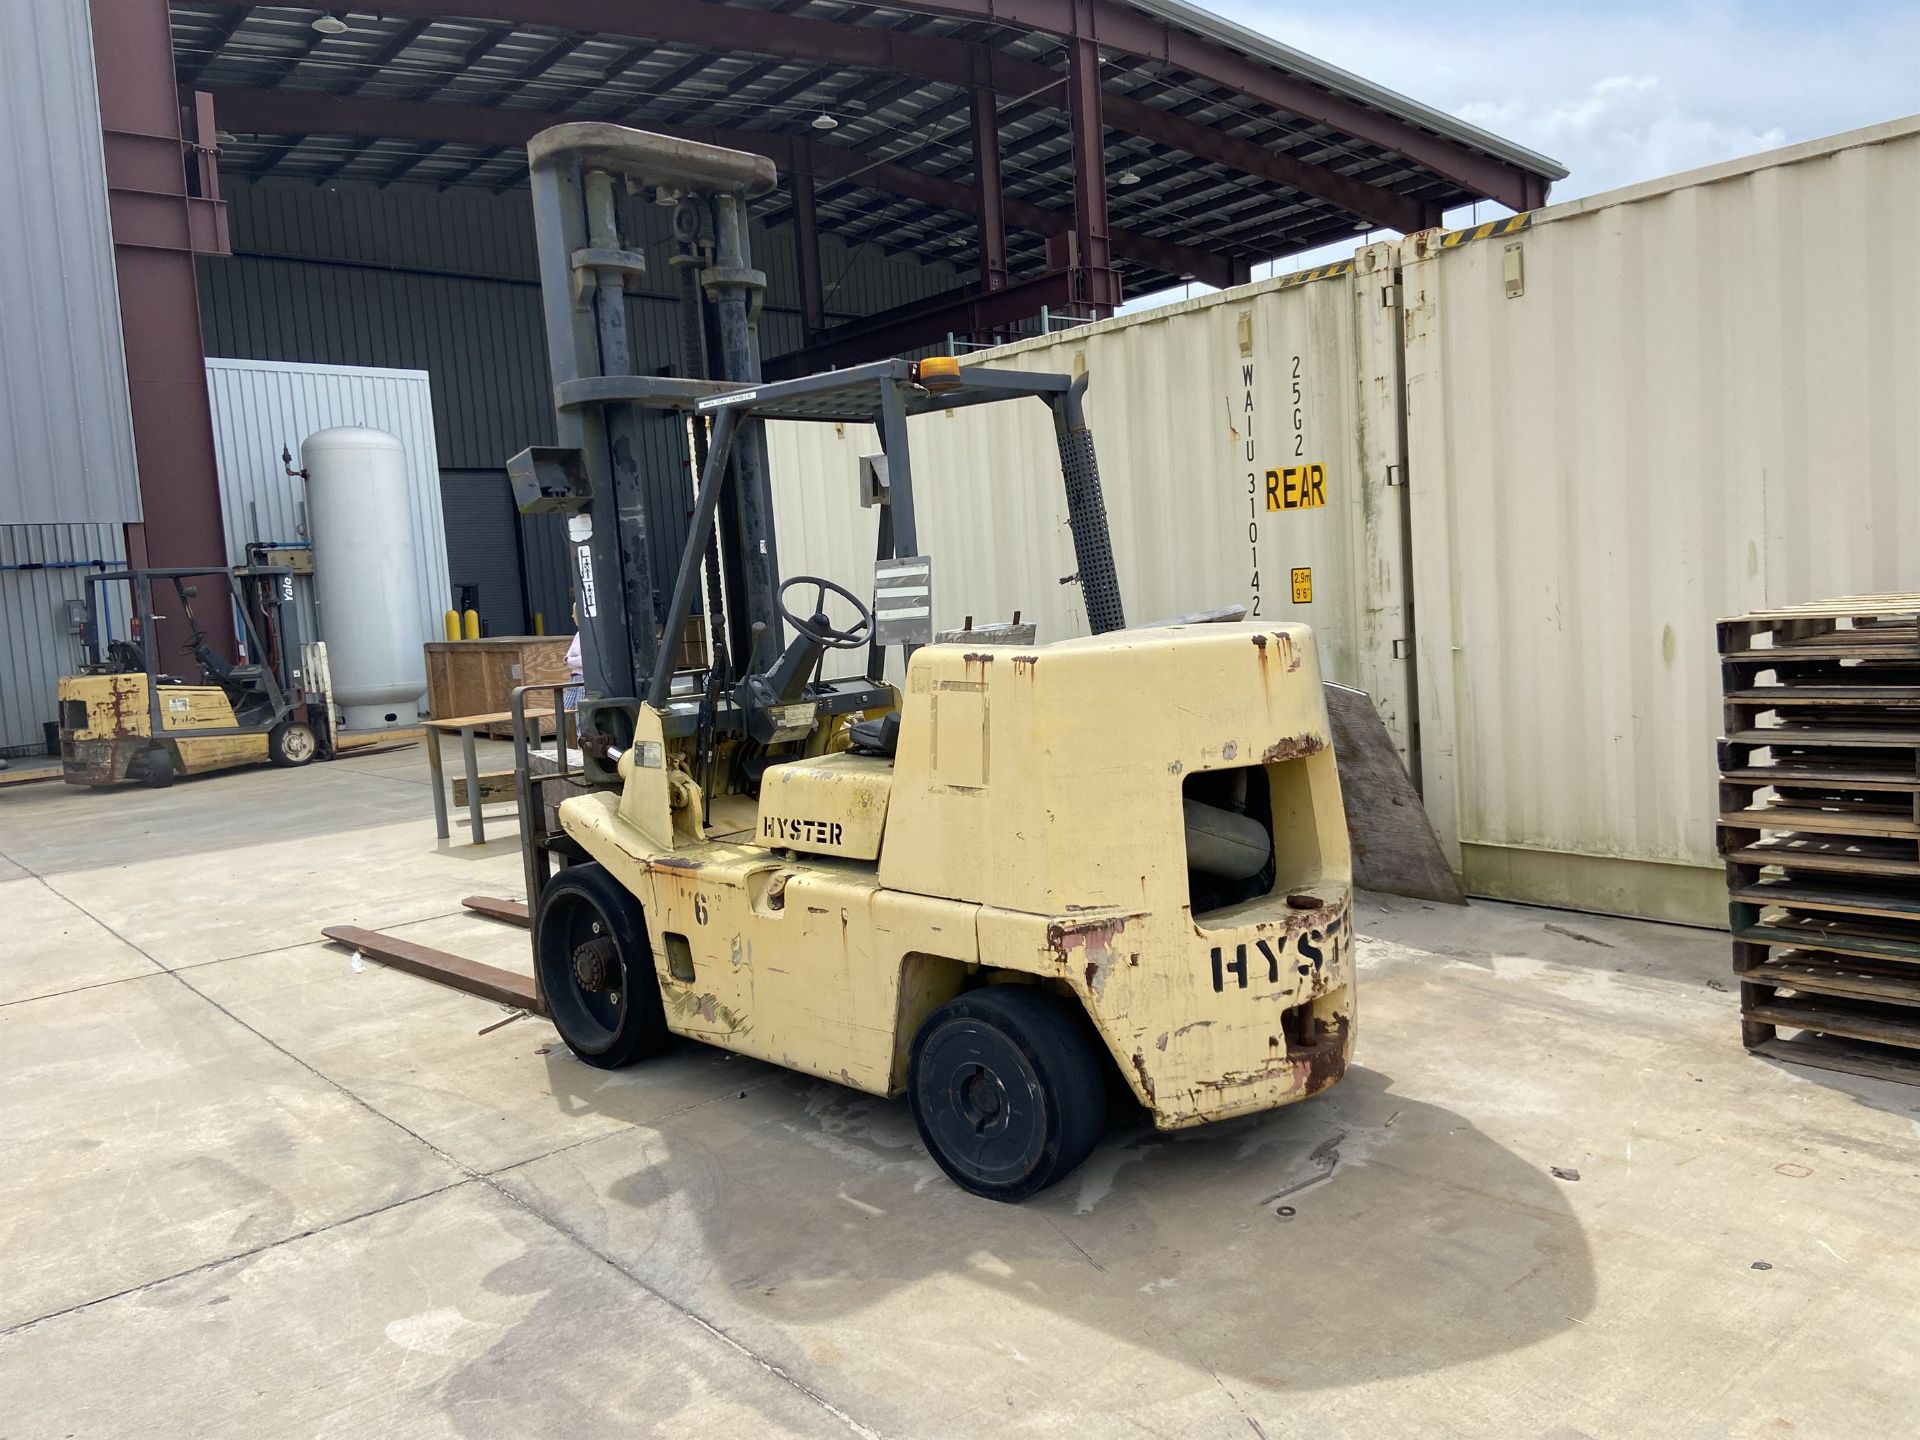 HYSTER S155XL2 Diesel Forklift, s/n B024D06424X, 14,700 lb Capacity, 173" Lift Height, Hard Tires (L - Image 4 of 8